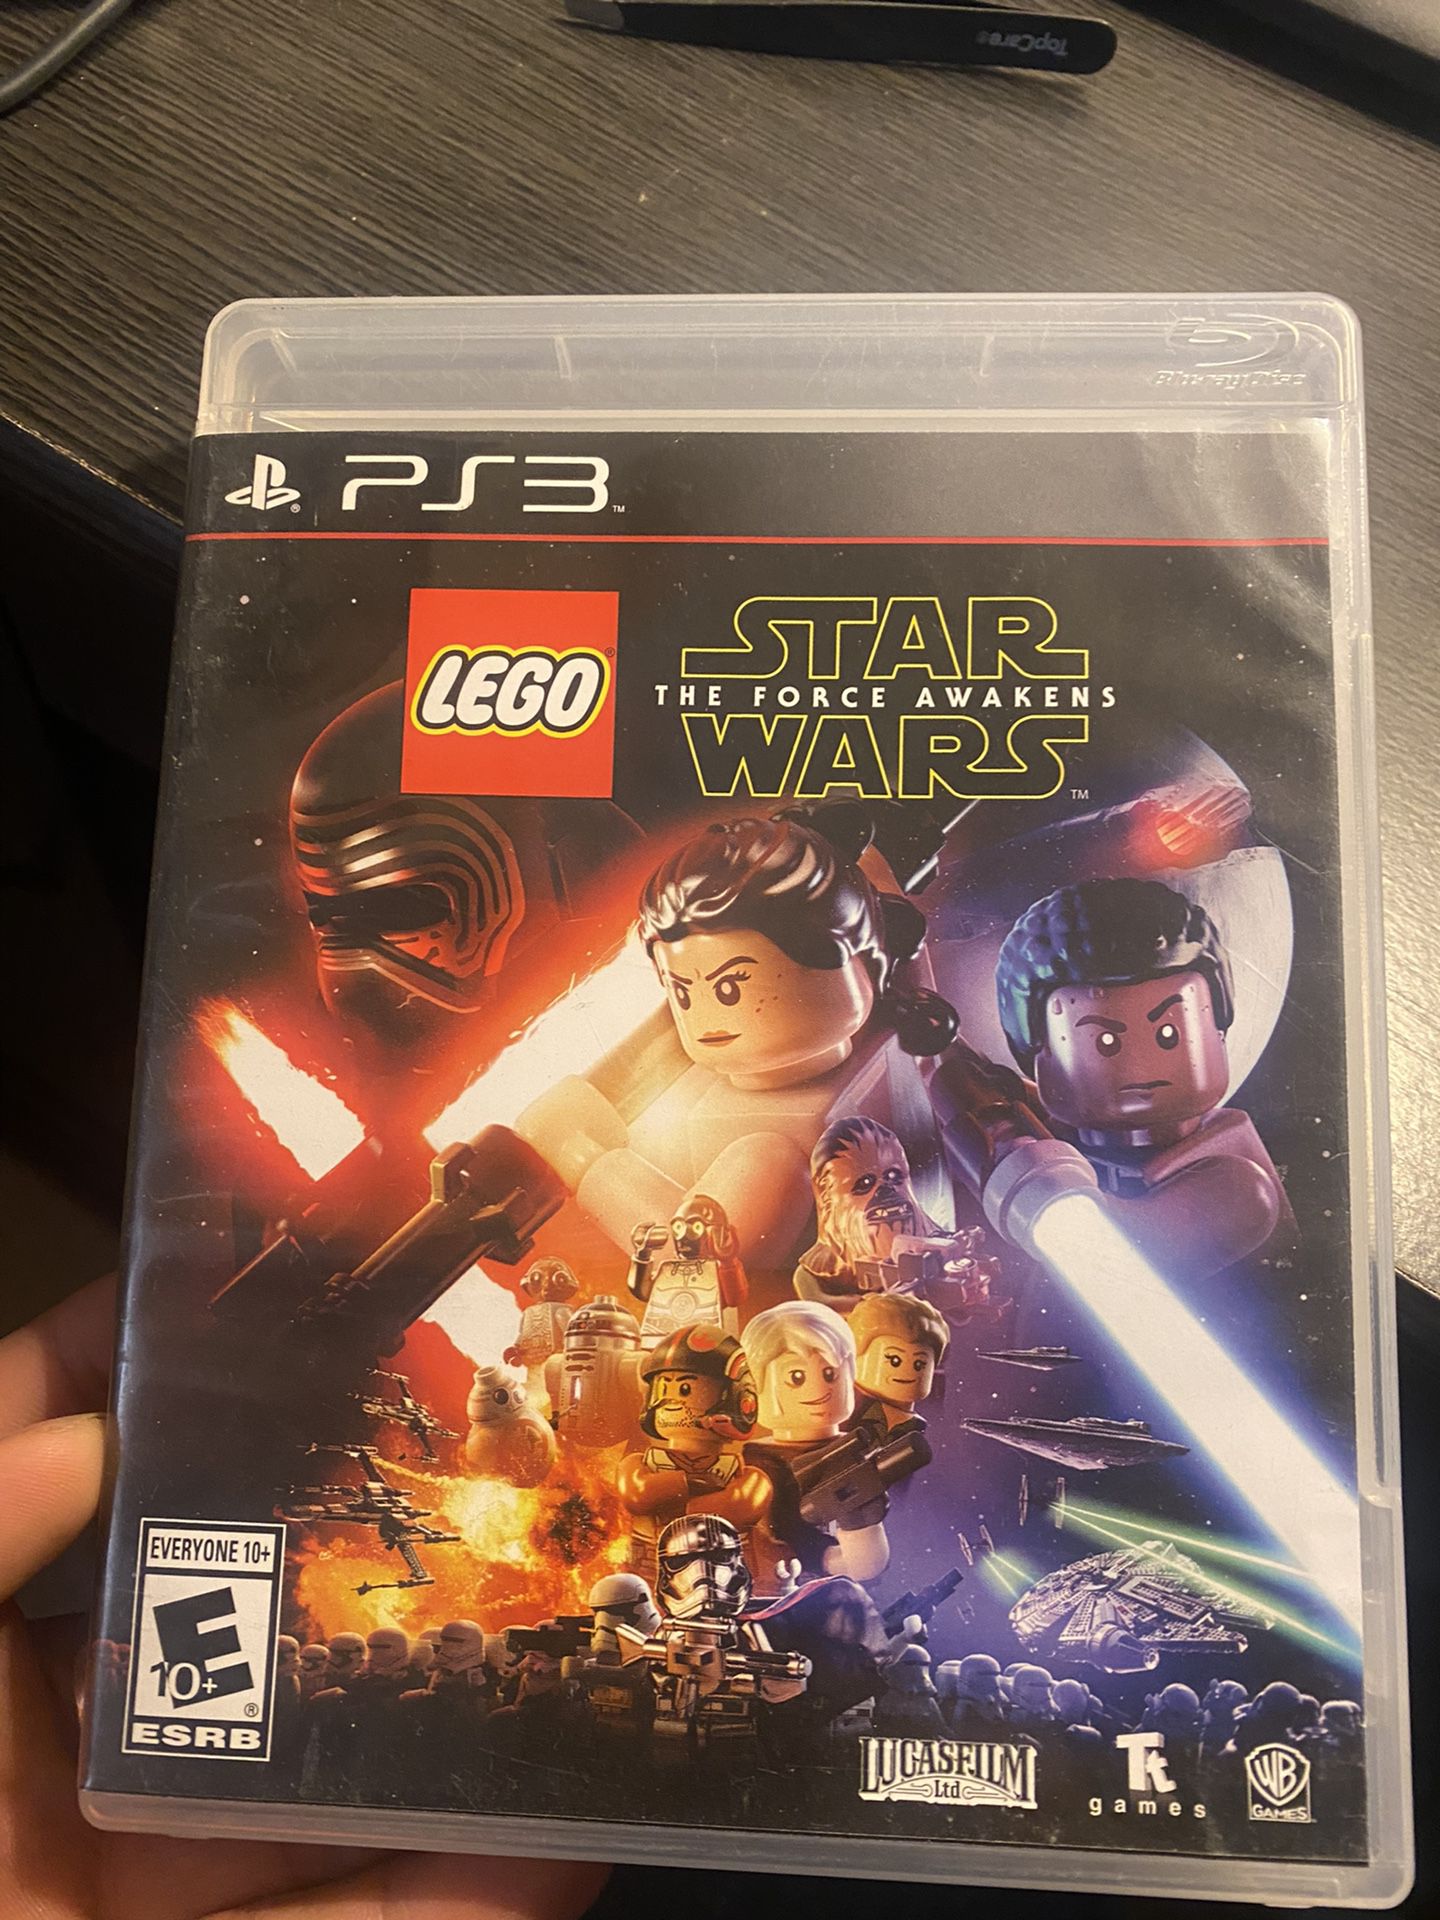 PS3 Lego Star Wars The Force Awakens Game